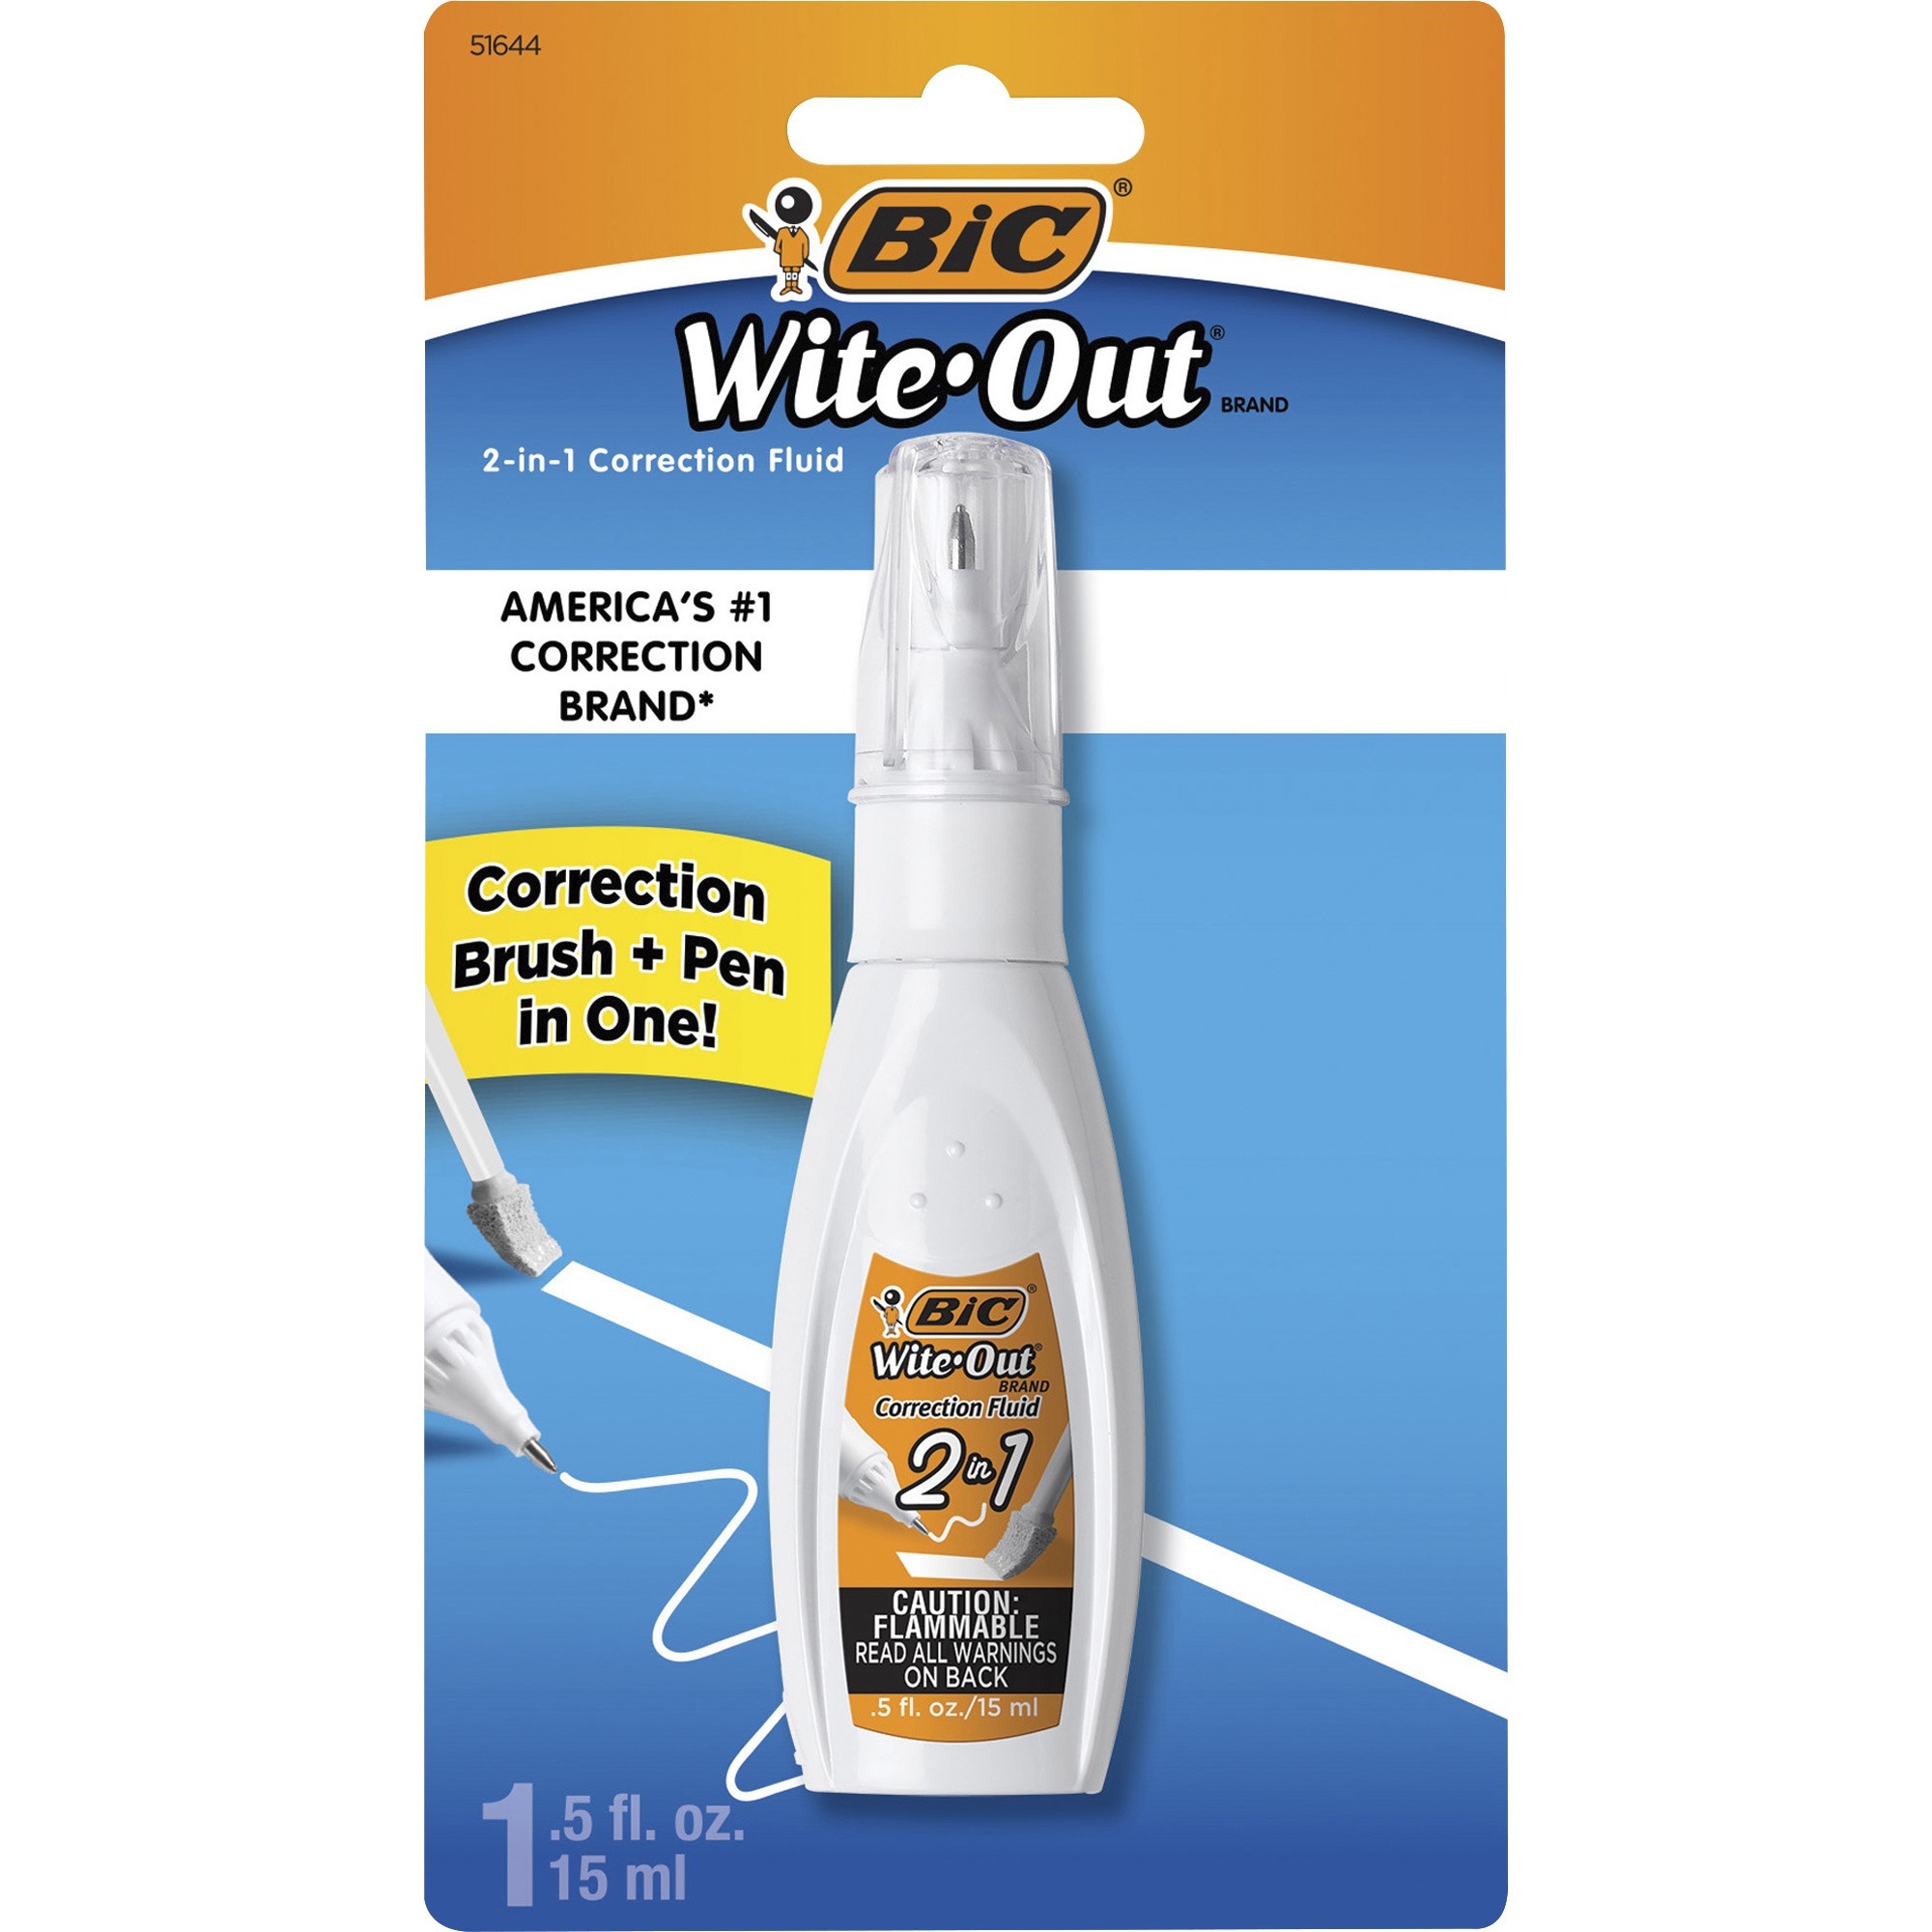 BIC Wite-Out Quick Dry Correction Fluid - Foam Wedge Applicator - 20 mL -  White - Quick Drying, Spill Resistant - 3 / Pack